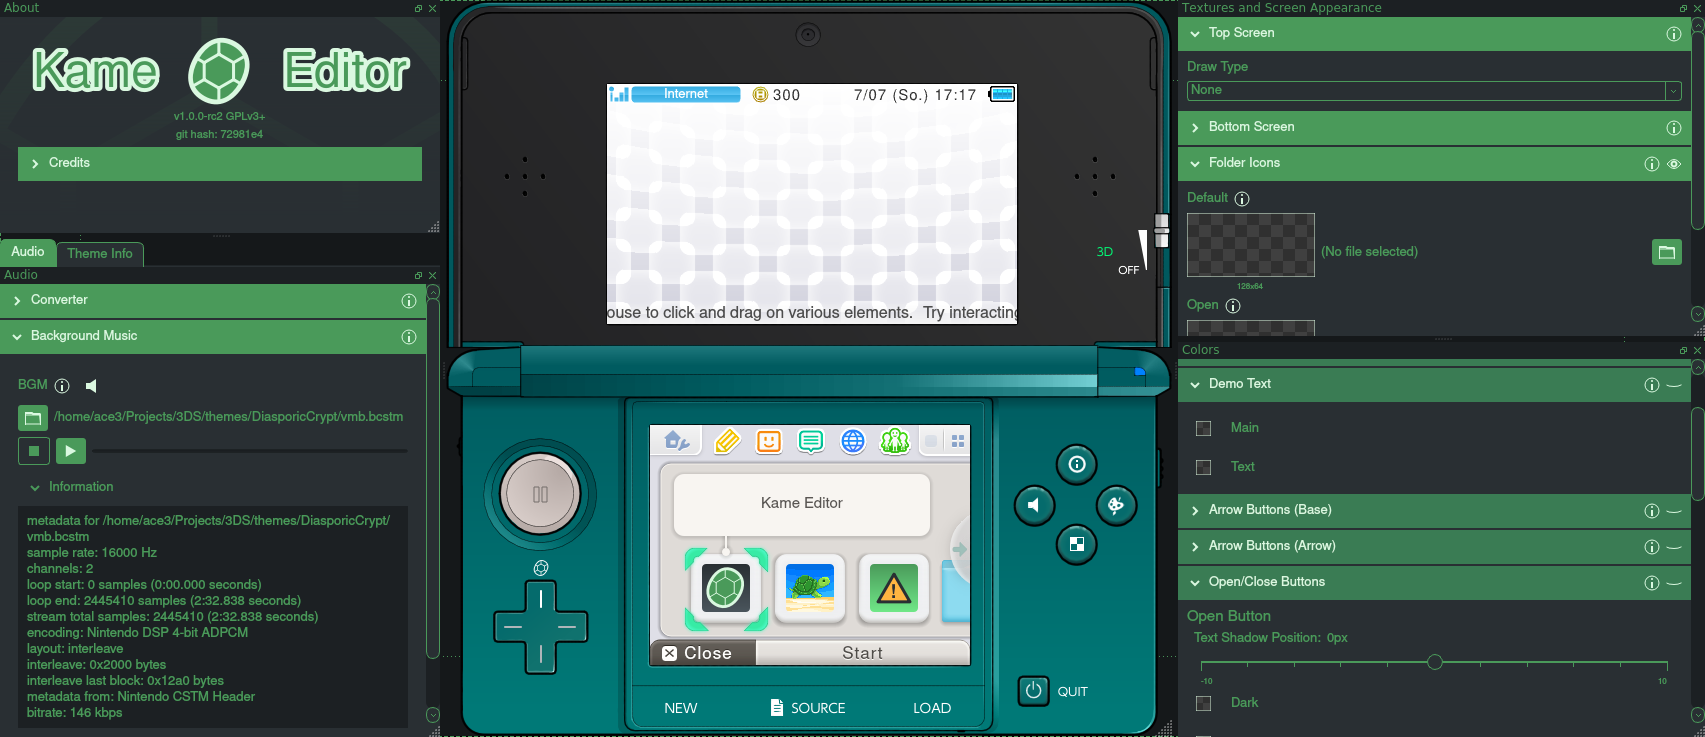 Release]Kame Editor - 3DS Theme Editor for non-Windows Users | GBAtemp.net  - The Independent Video Game Community